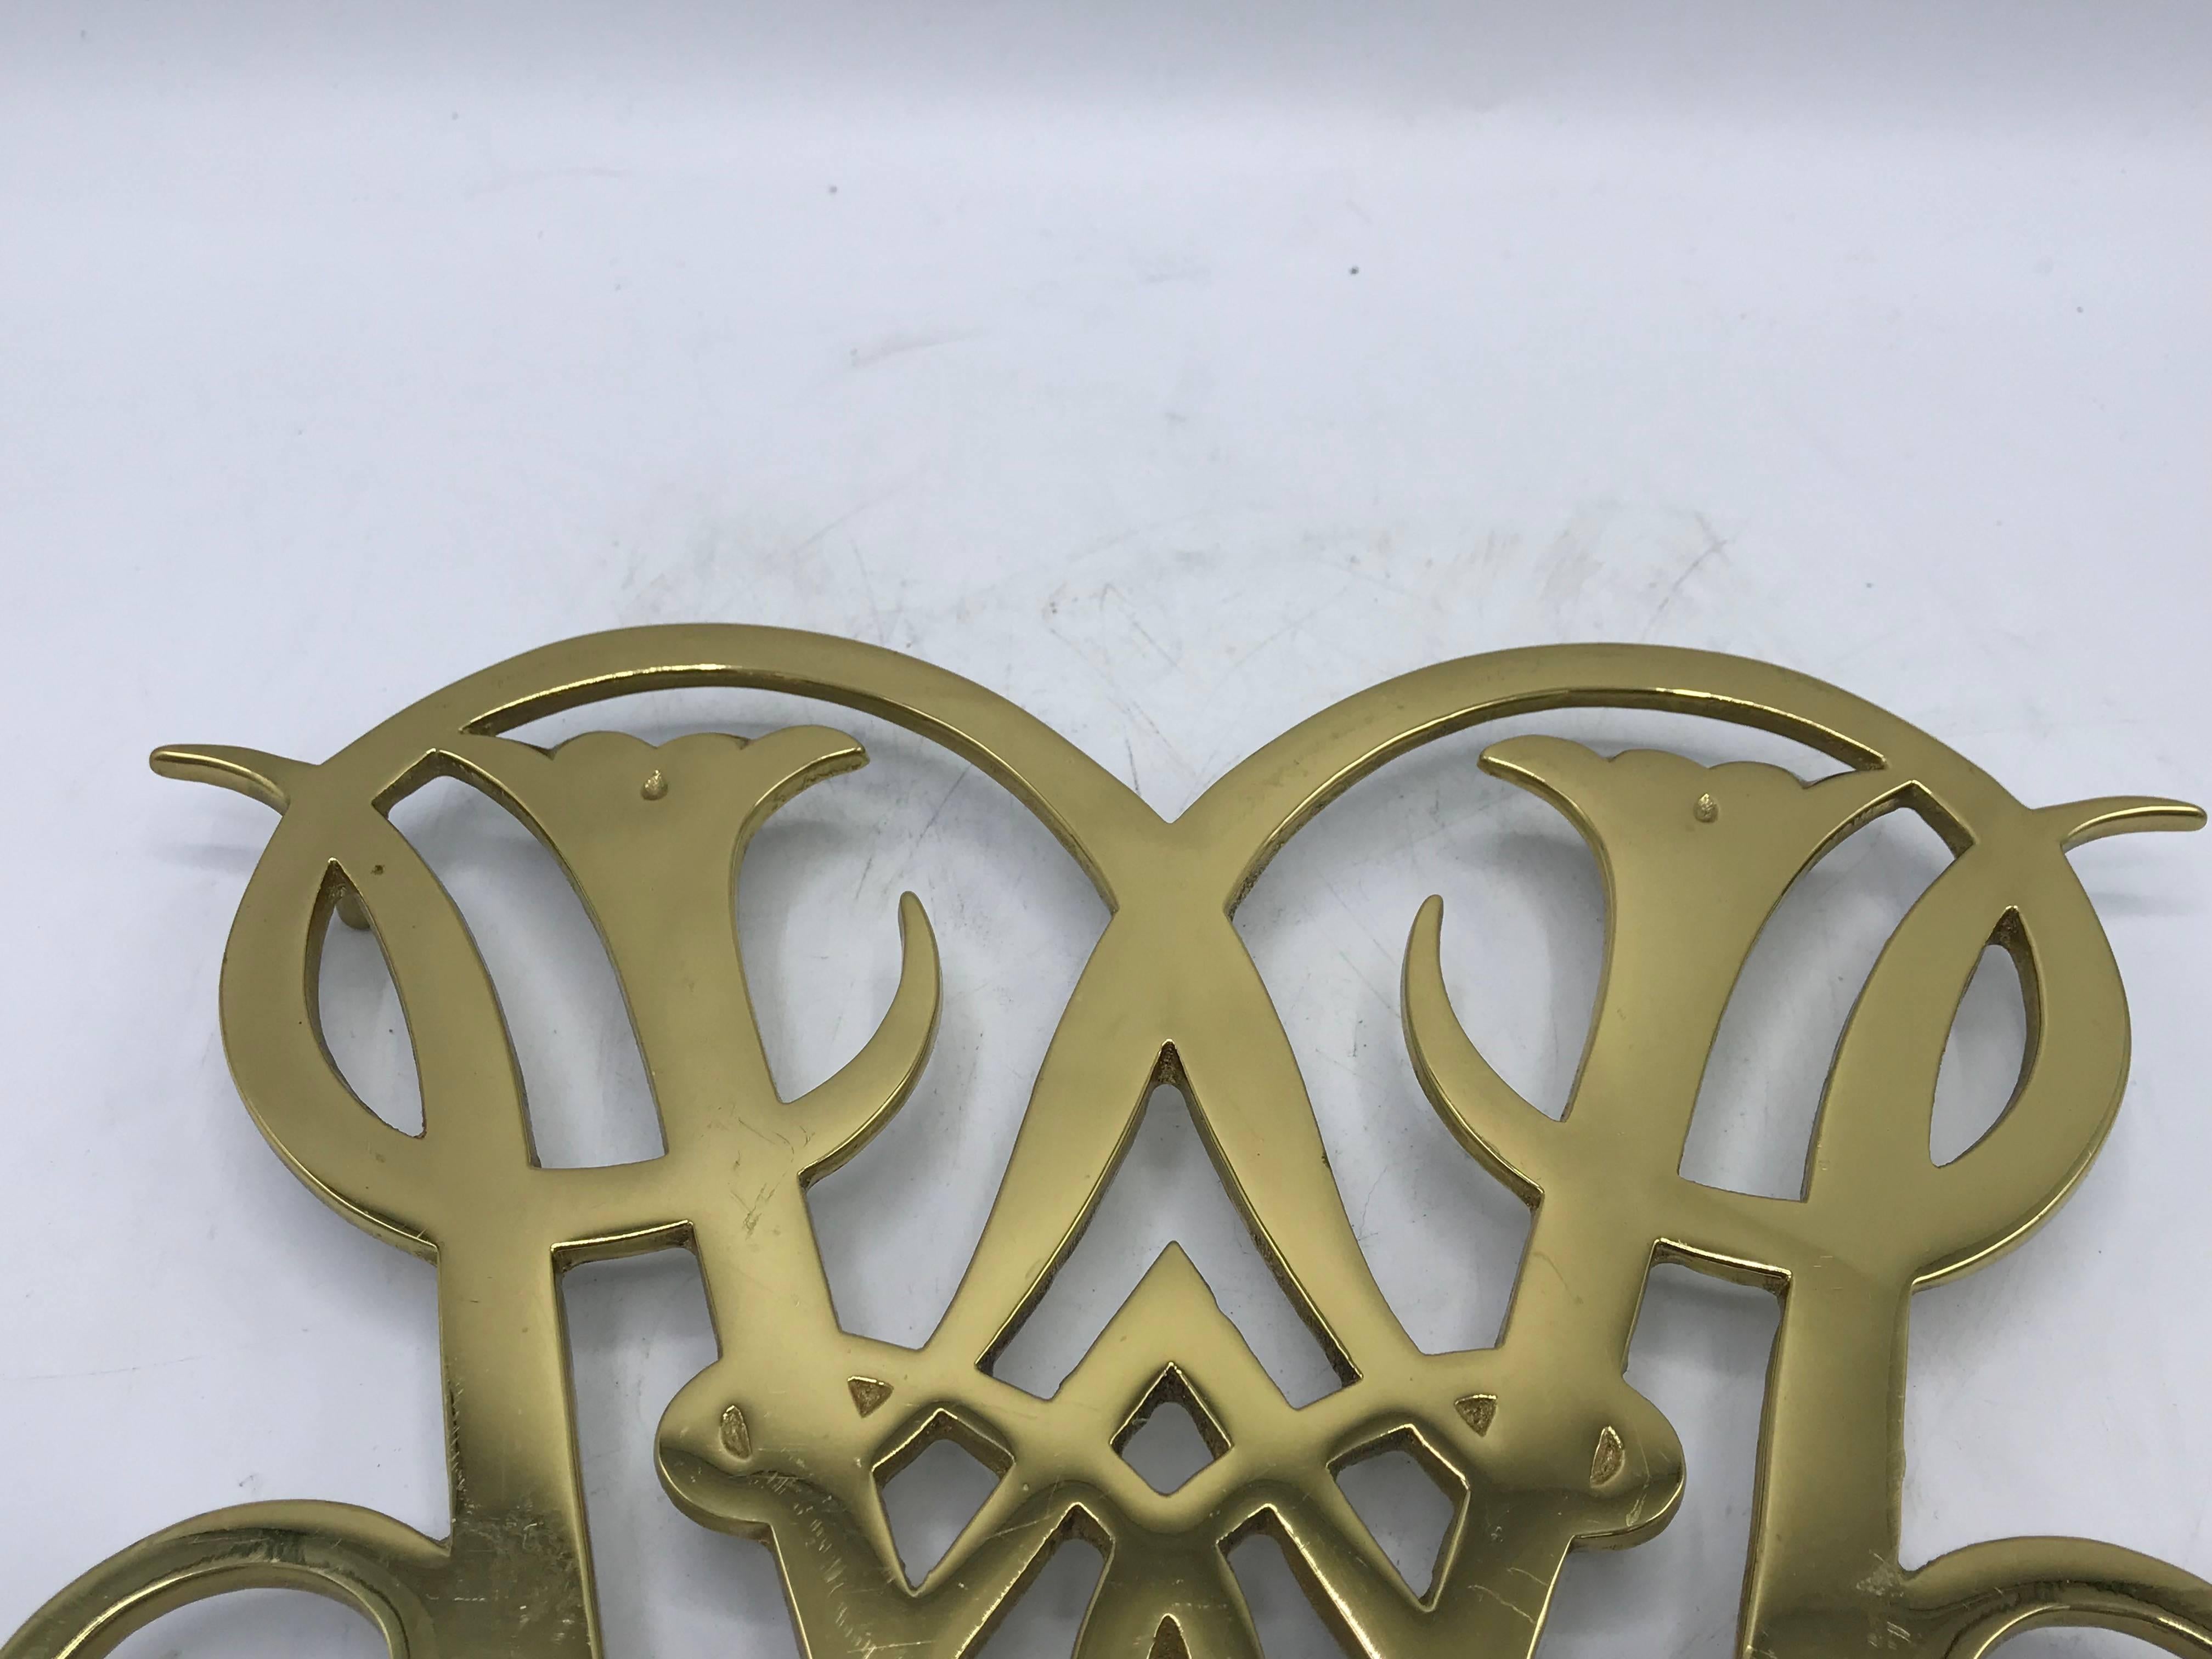 Offered is an iconic and traditional, 1950s Virginia Metalcrafters solid-brass, Queen Ann Cypher of Williamsburg trivet. Would be beautiful for intended use, plant stand, or as tabletop decor. Marked on backside with Virginia Metalcrafters signature